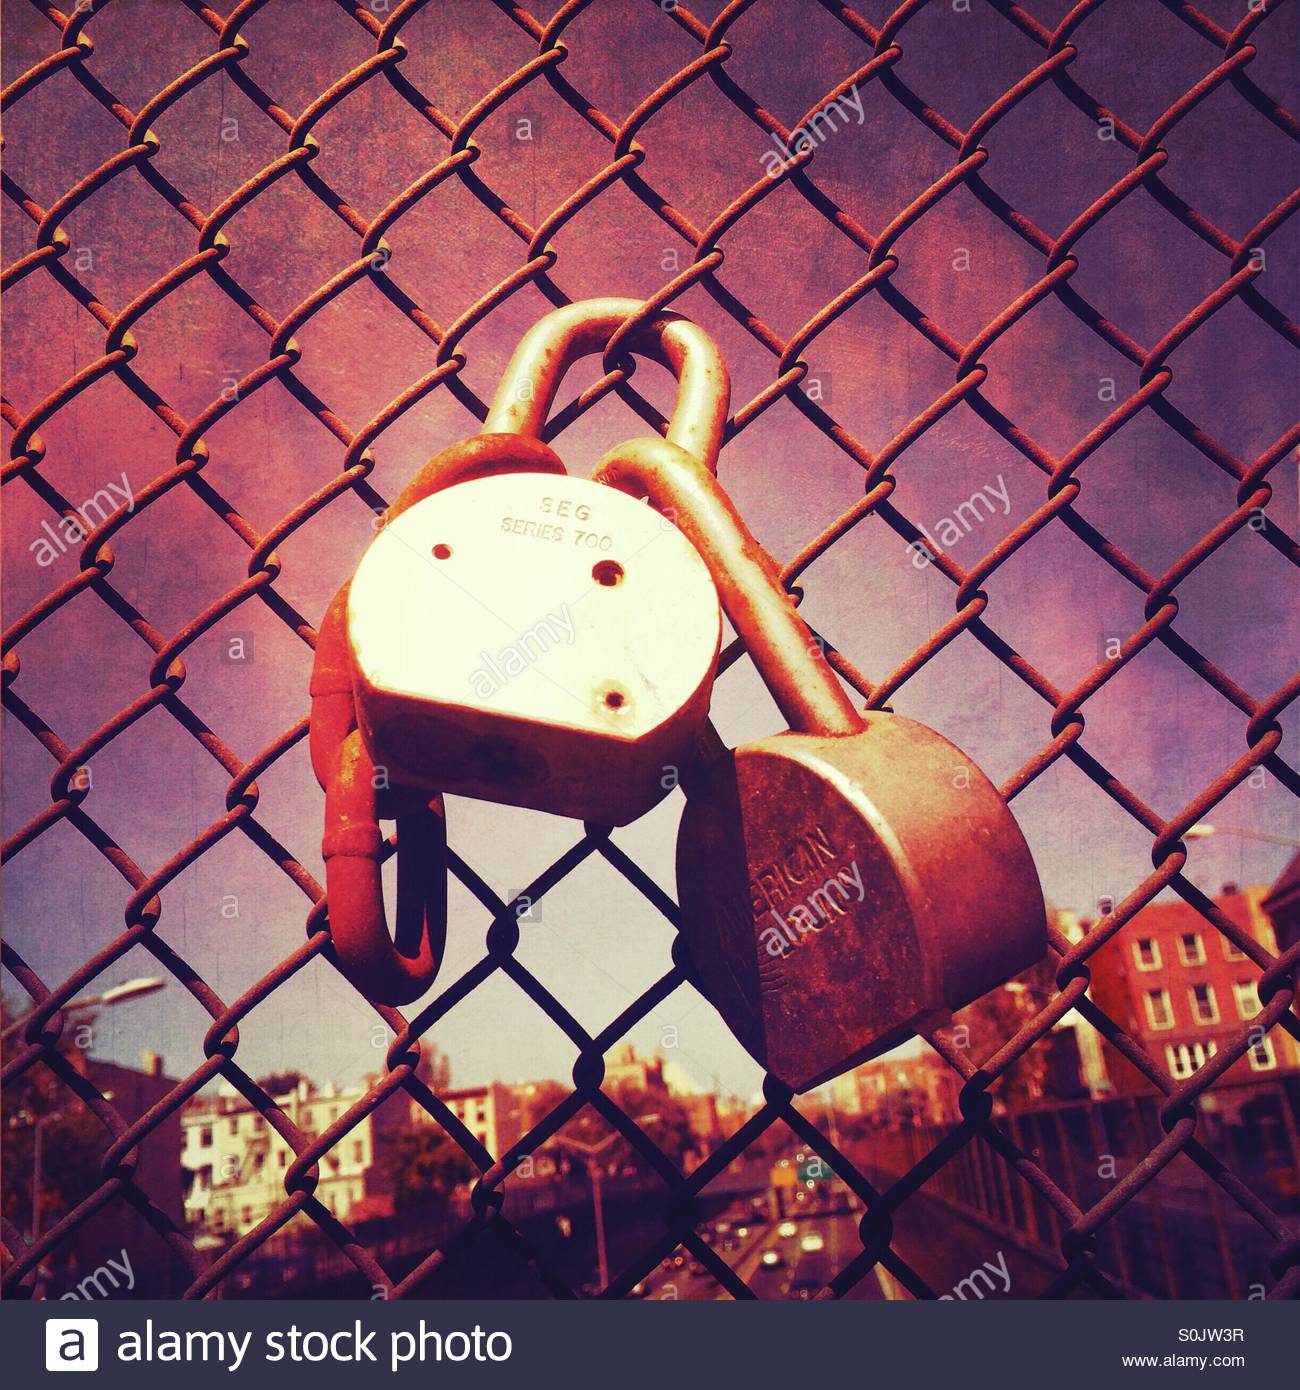 padlocks-on-chain-link-fence-by-the-high